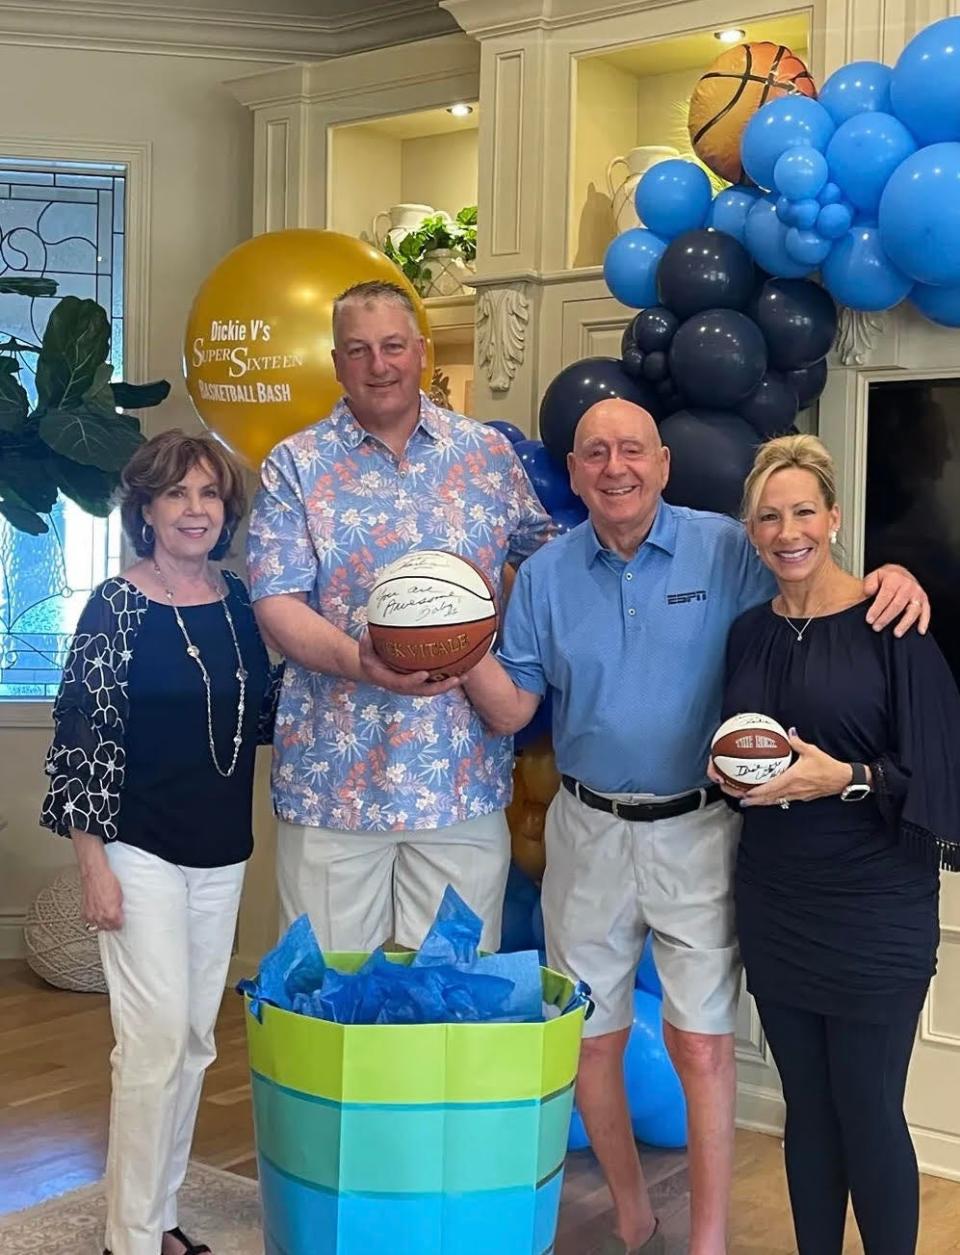 From left, Lorraine Vitale, Charlie Johnson, Dick Vitale, and Tammie Johnson at Vitale's home in Lakewood Ranch. Tammie won the first Super Sixteen Basketball Bash.